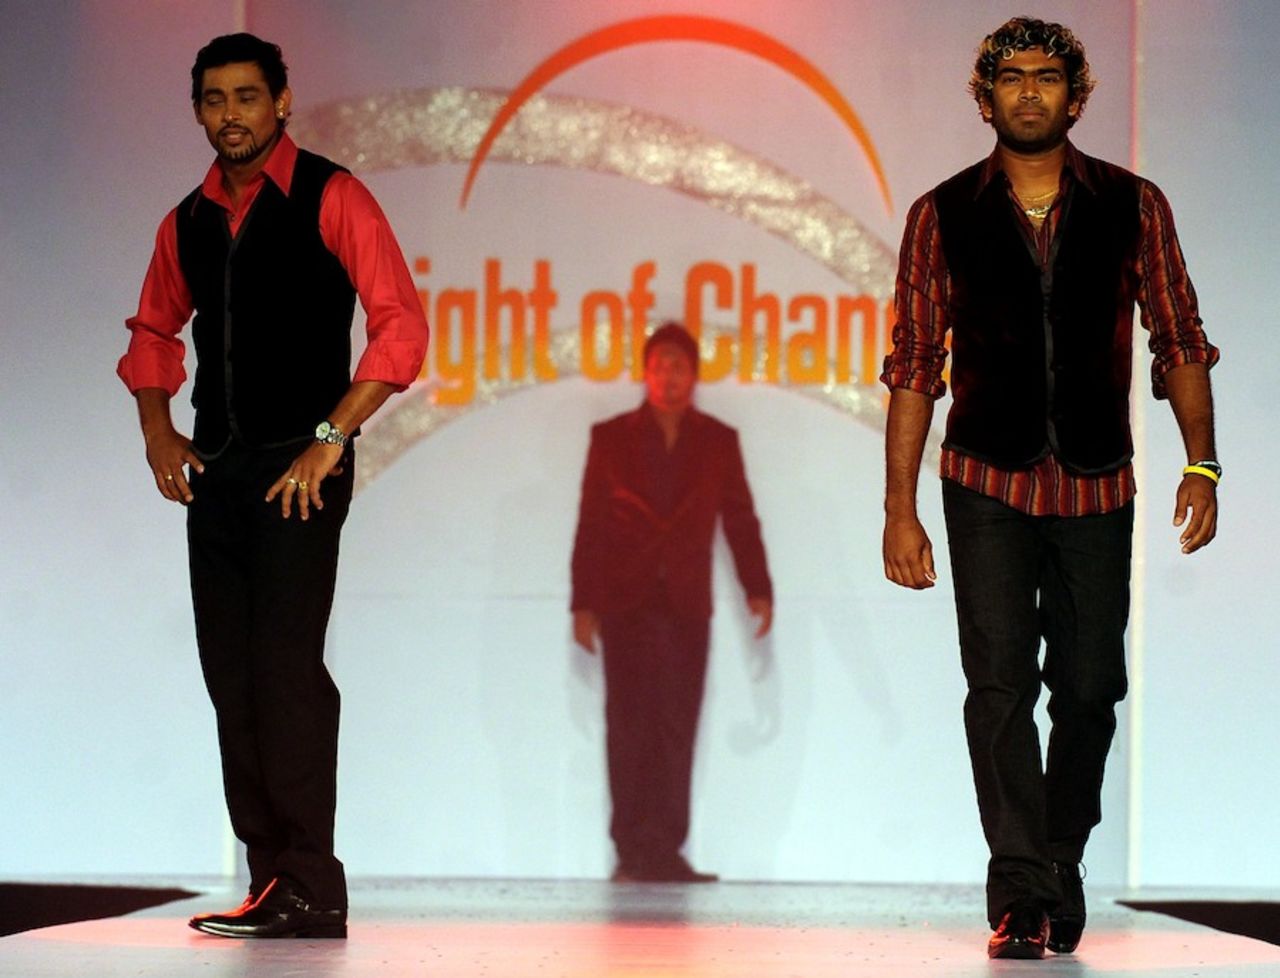 Tillakaratne Dilshan and Lasith Malinga take part in a fashion show, Colombo, October 11, 2010